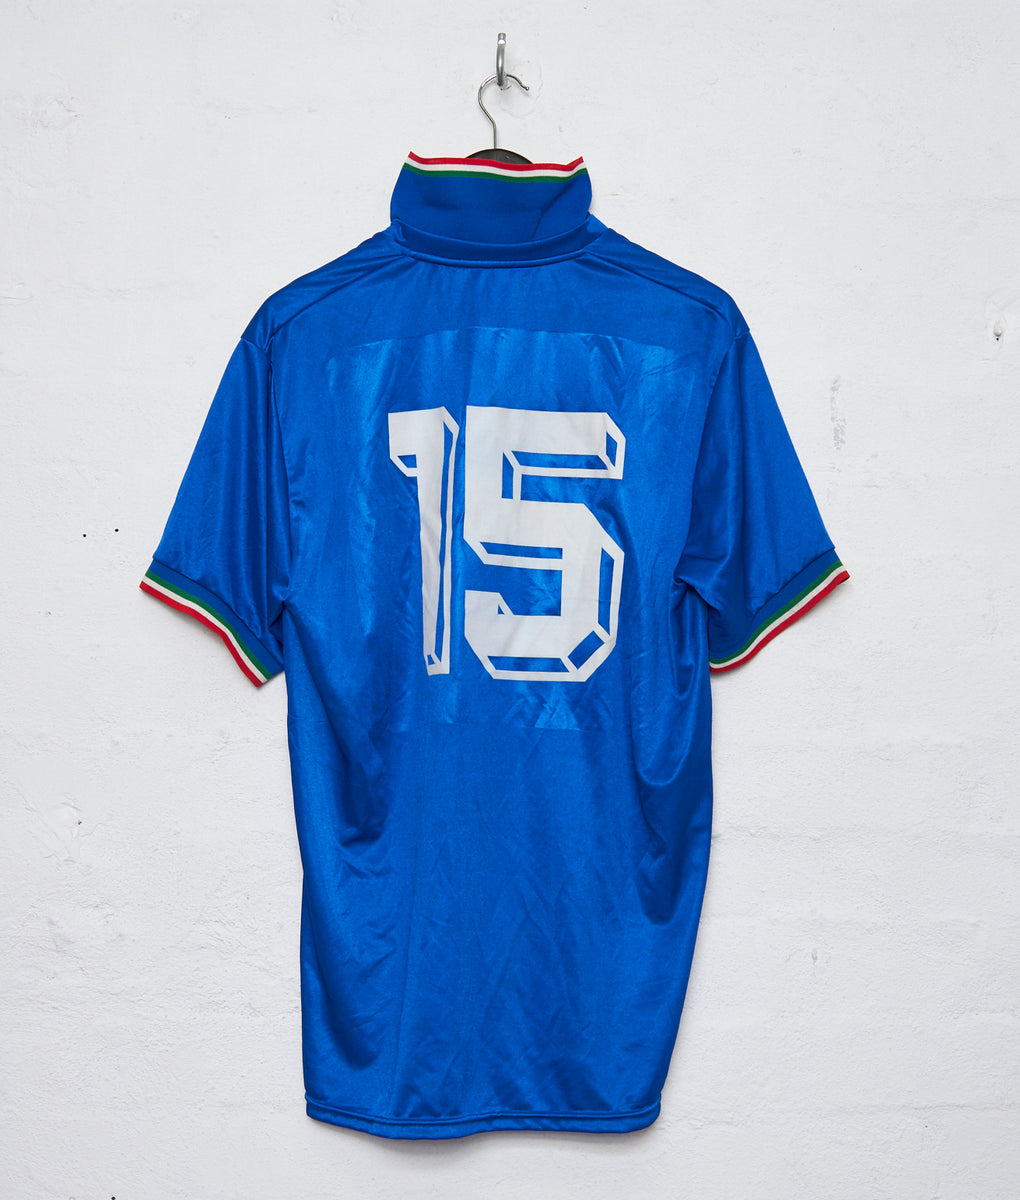 Vintage Italy Jersey (M)